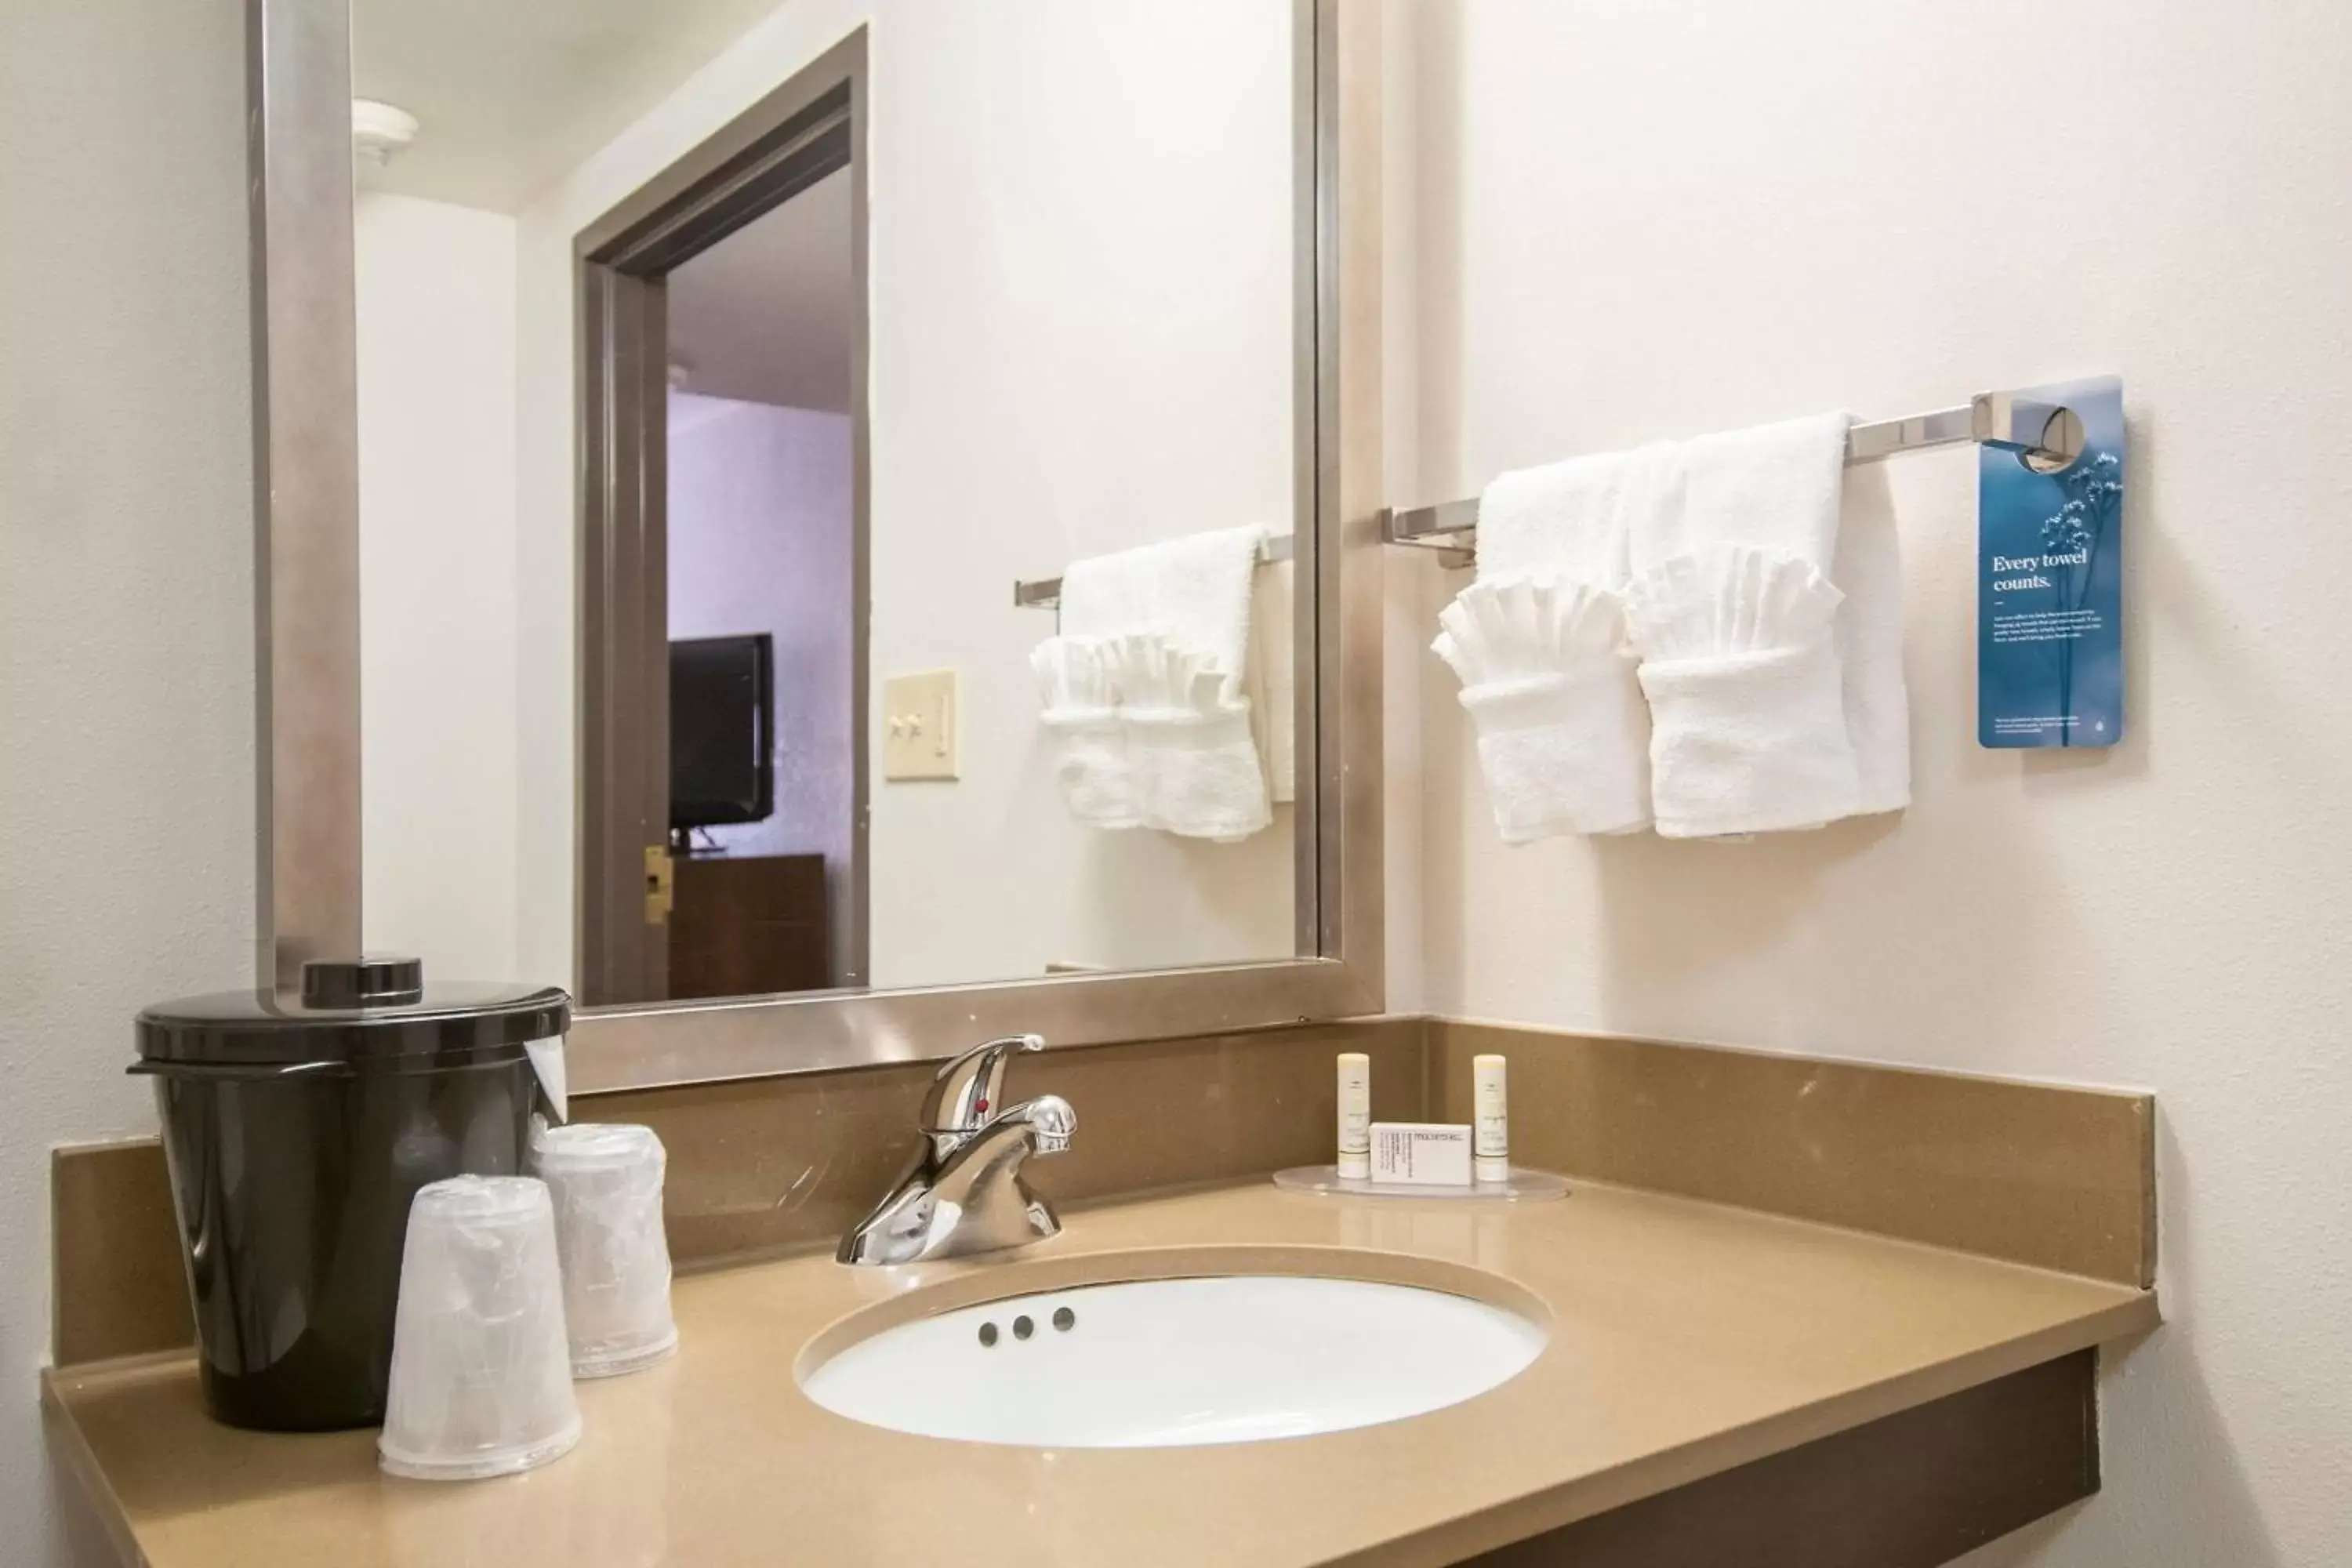 Bathroom in Fairfield Inn & Suites by Marriott Dallas DFW Airport South/Irving